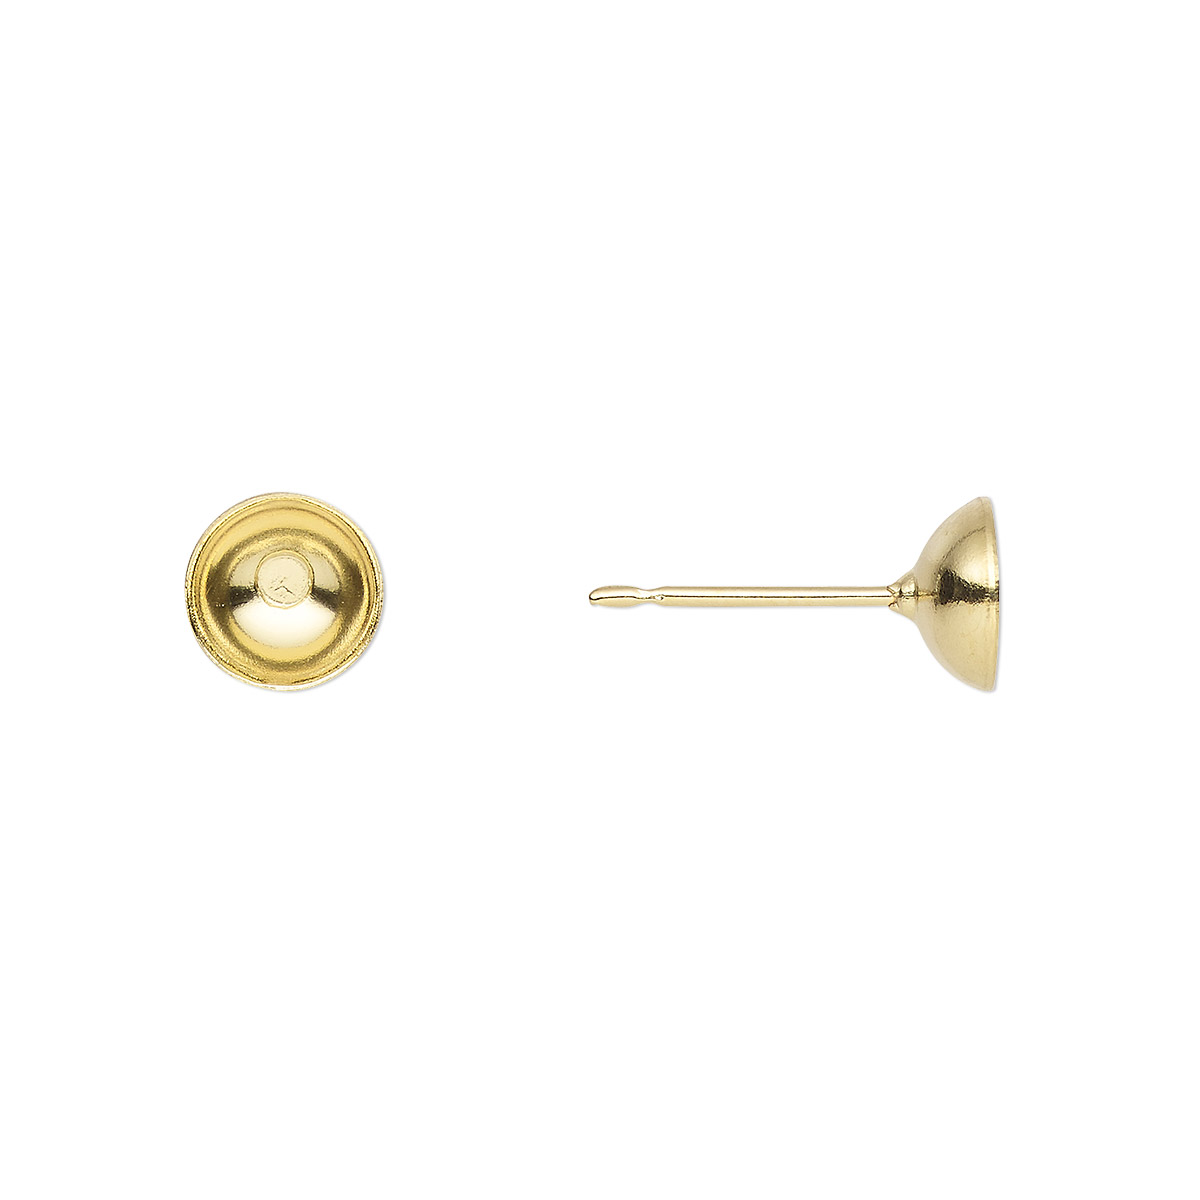 Earstud, gold-plated stainless steel, 6mm cup, fits 6-8mm bead. Sold ...